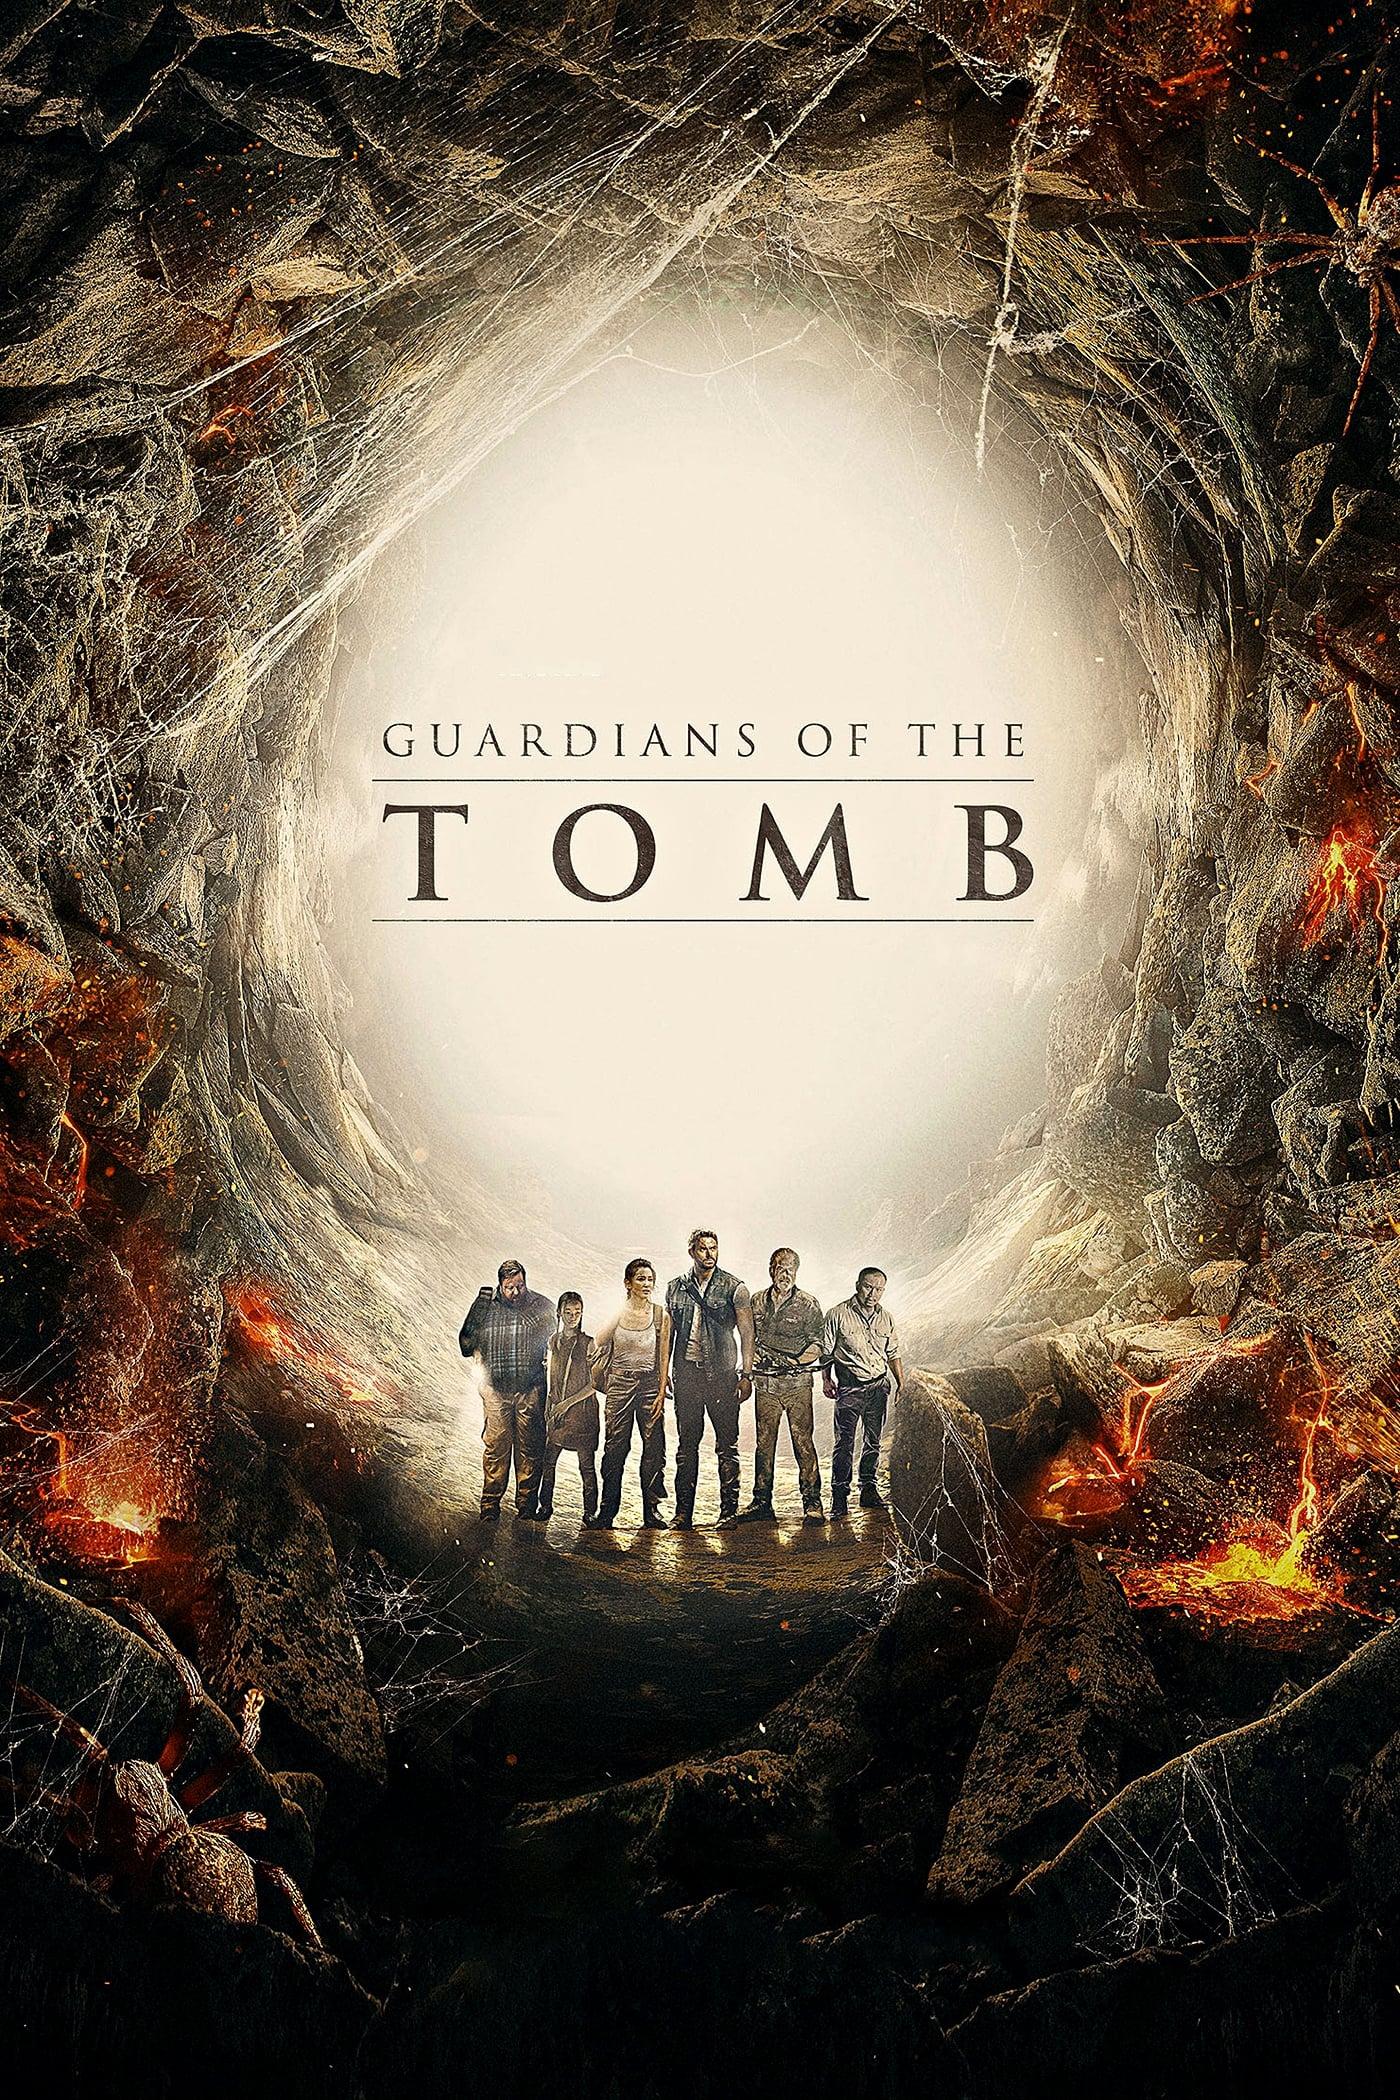 7 Guardians of the Tomb poster